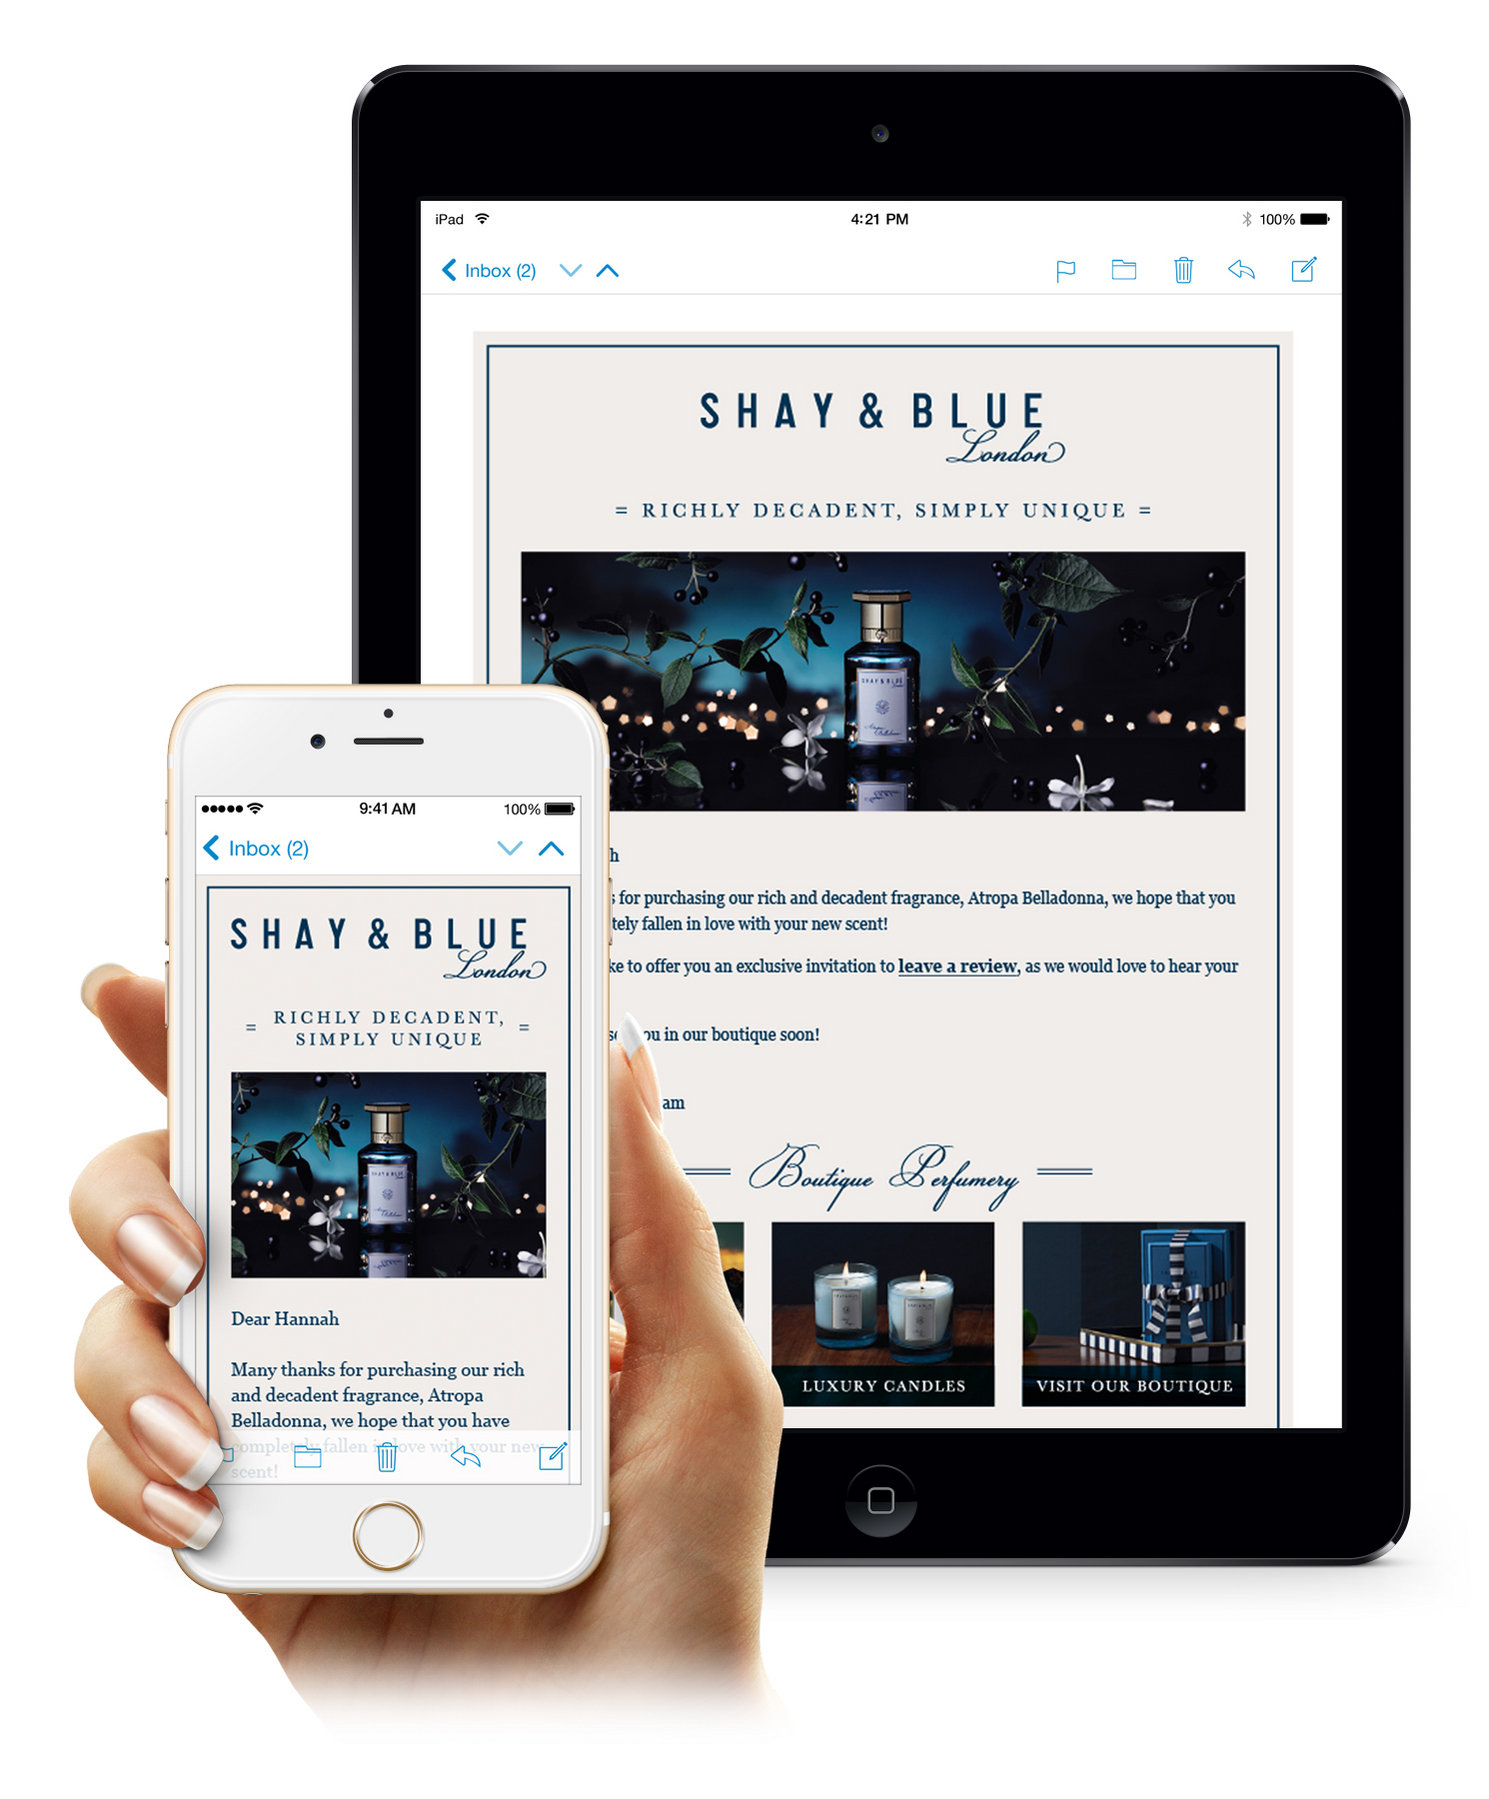 Shay & Blue email design shown on smart phone and tablet